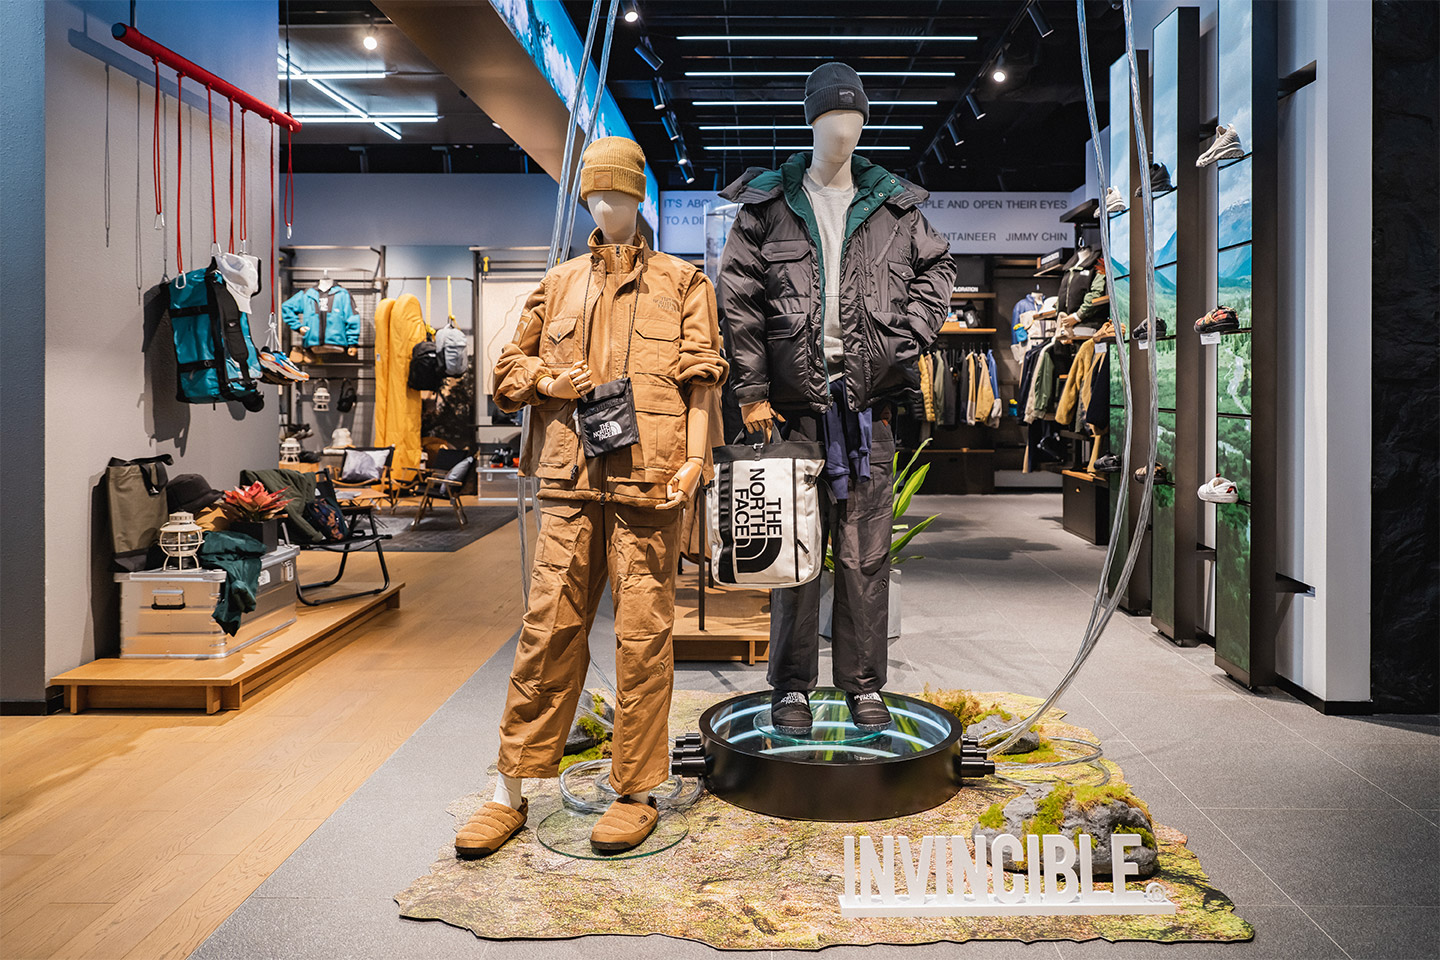 fundament Wiskunde evenwichtig The North Face Continues Expansion with Third Concept Store in Hong Kong -  The North Face